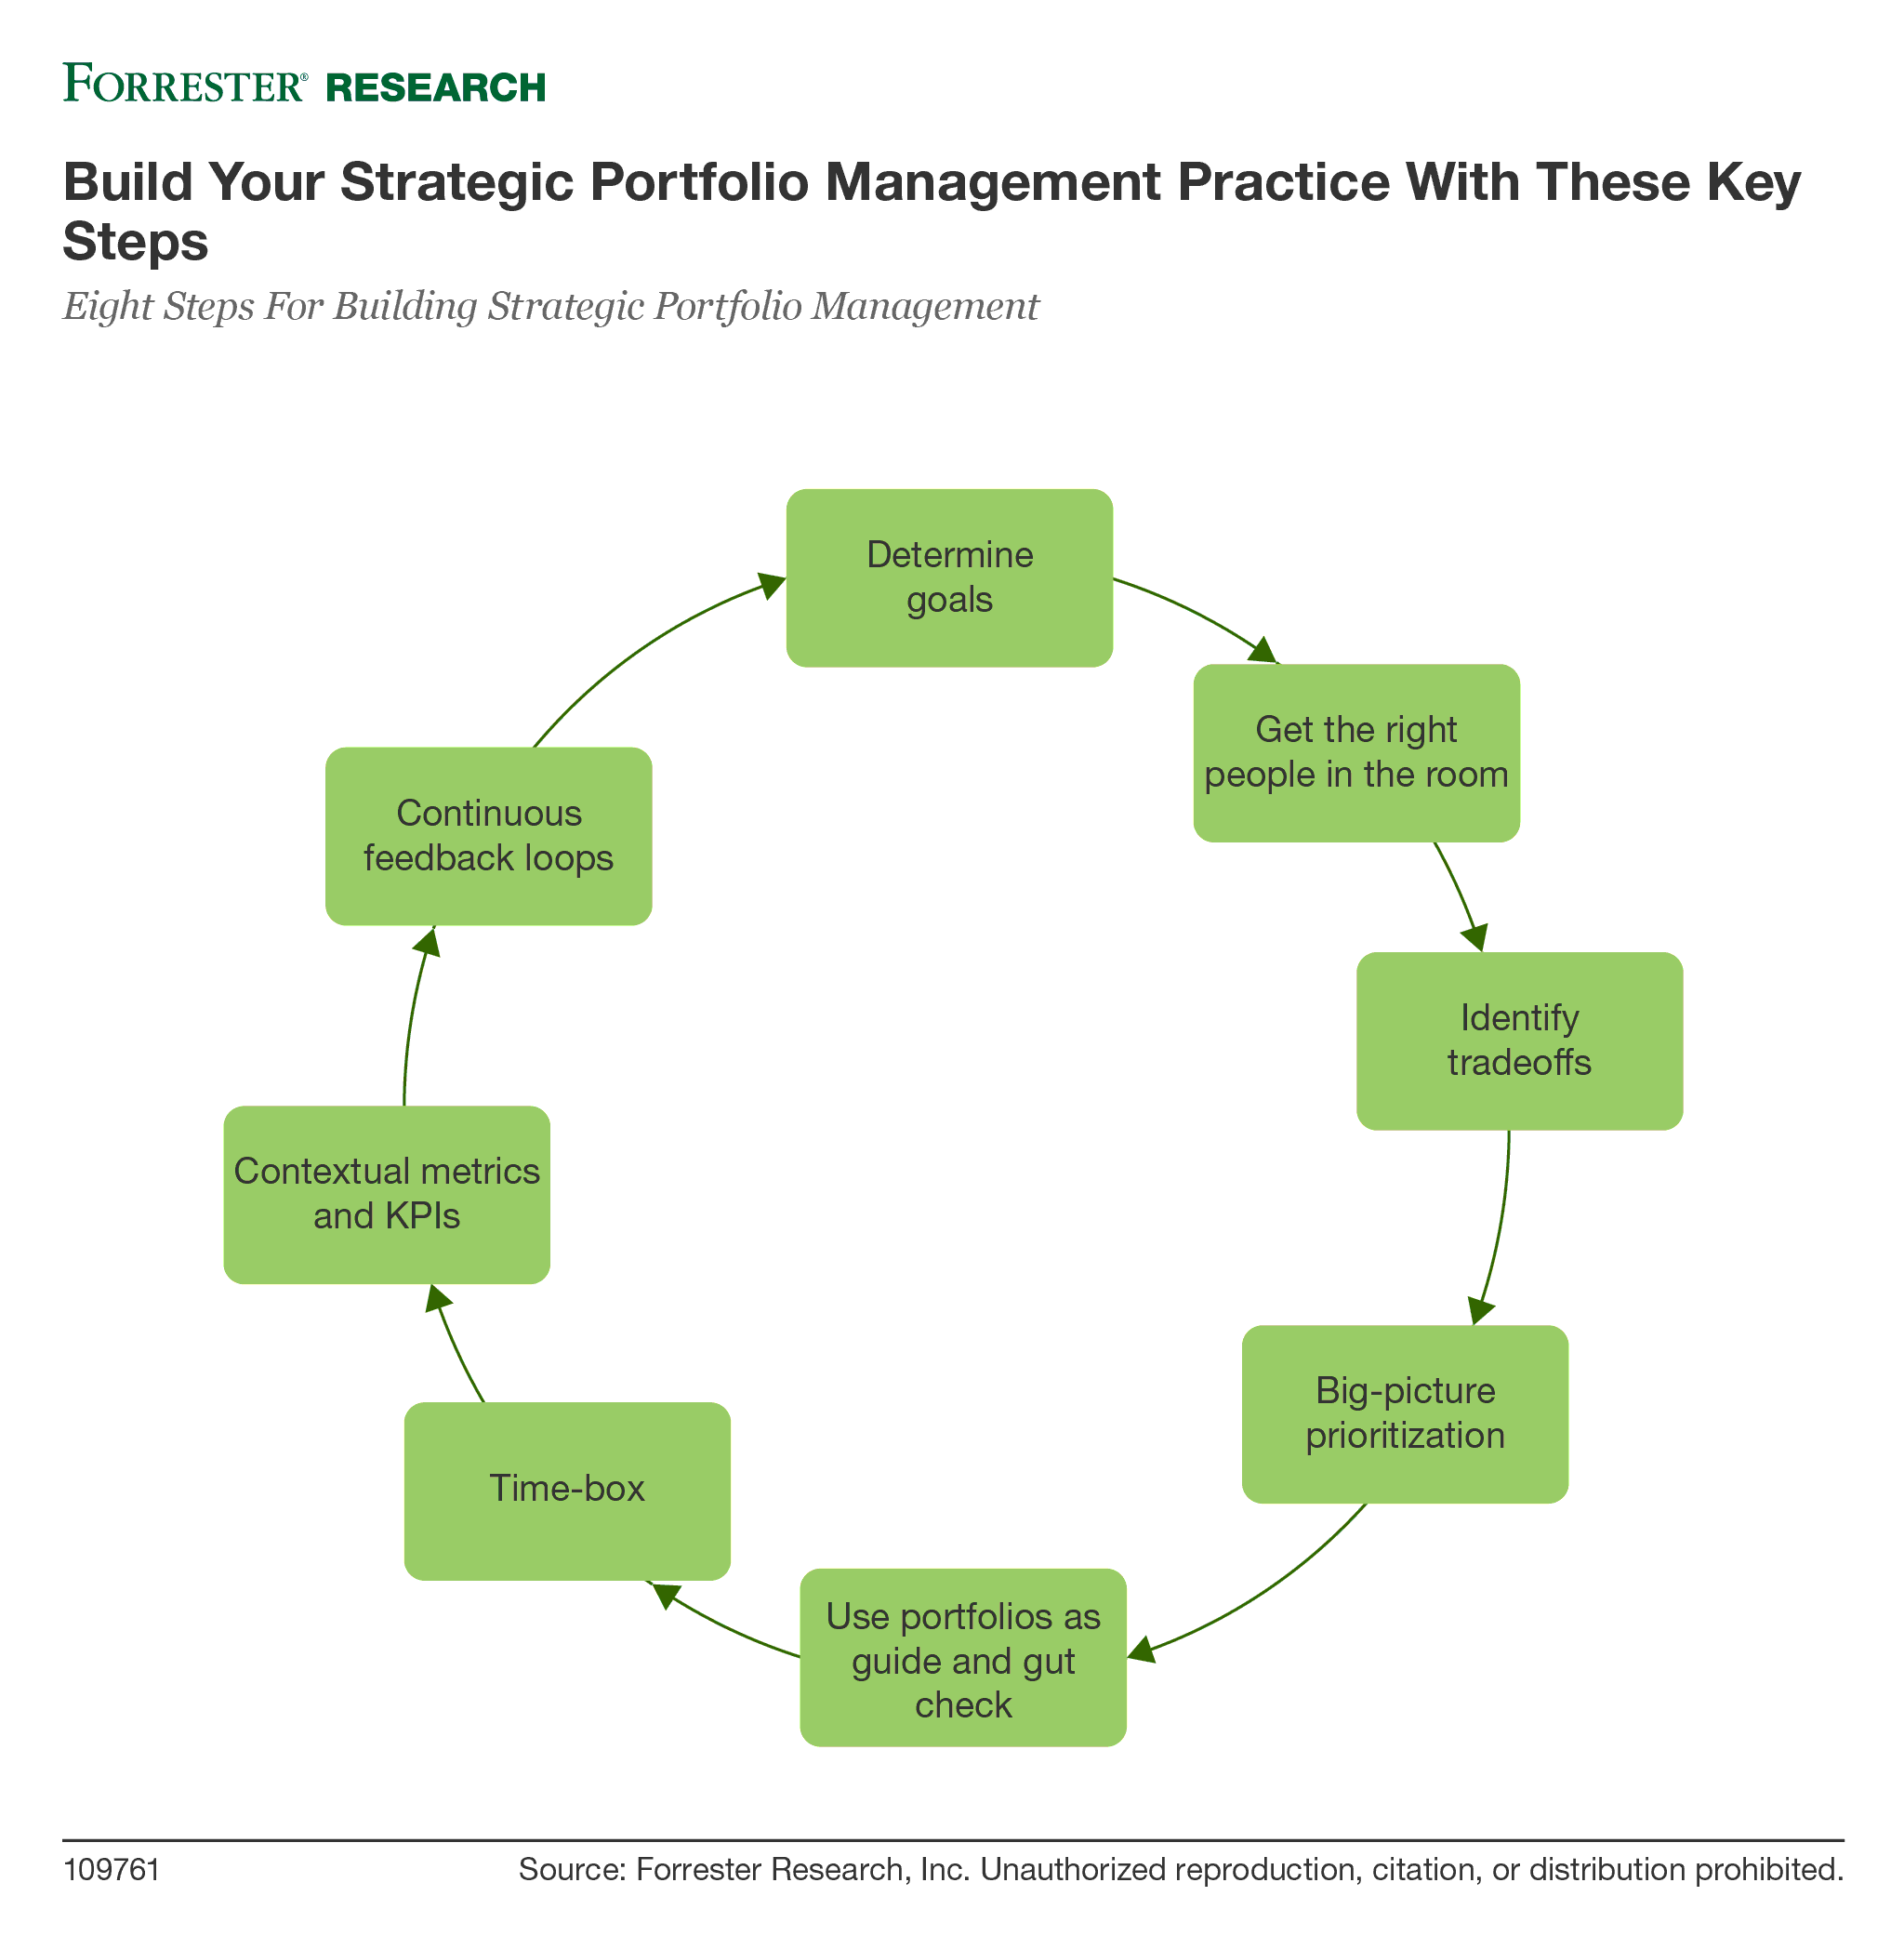 Build Your Strategic Portfolio Management Practice with These Key Steps